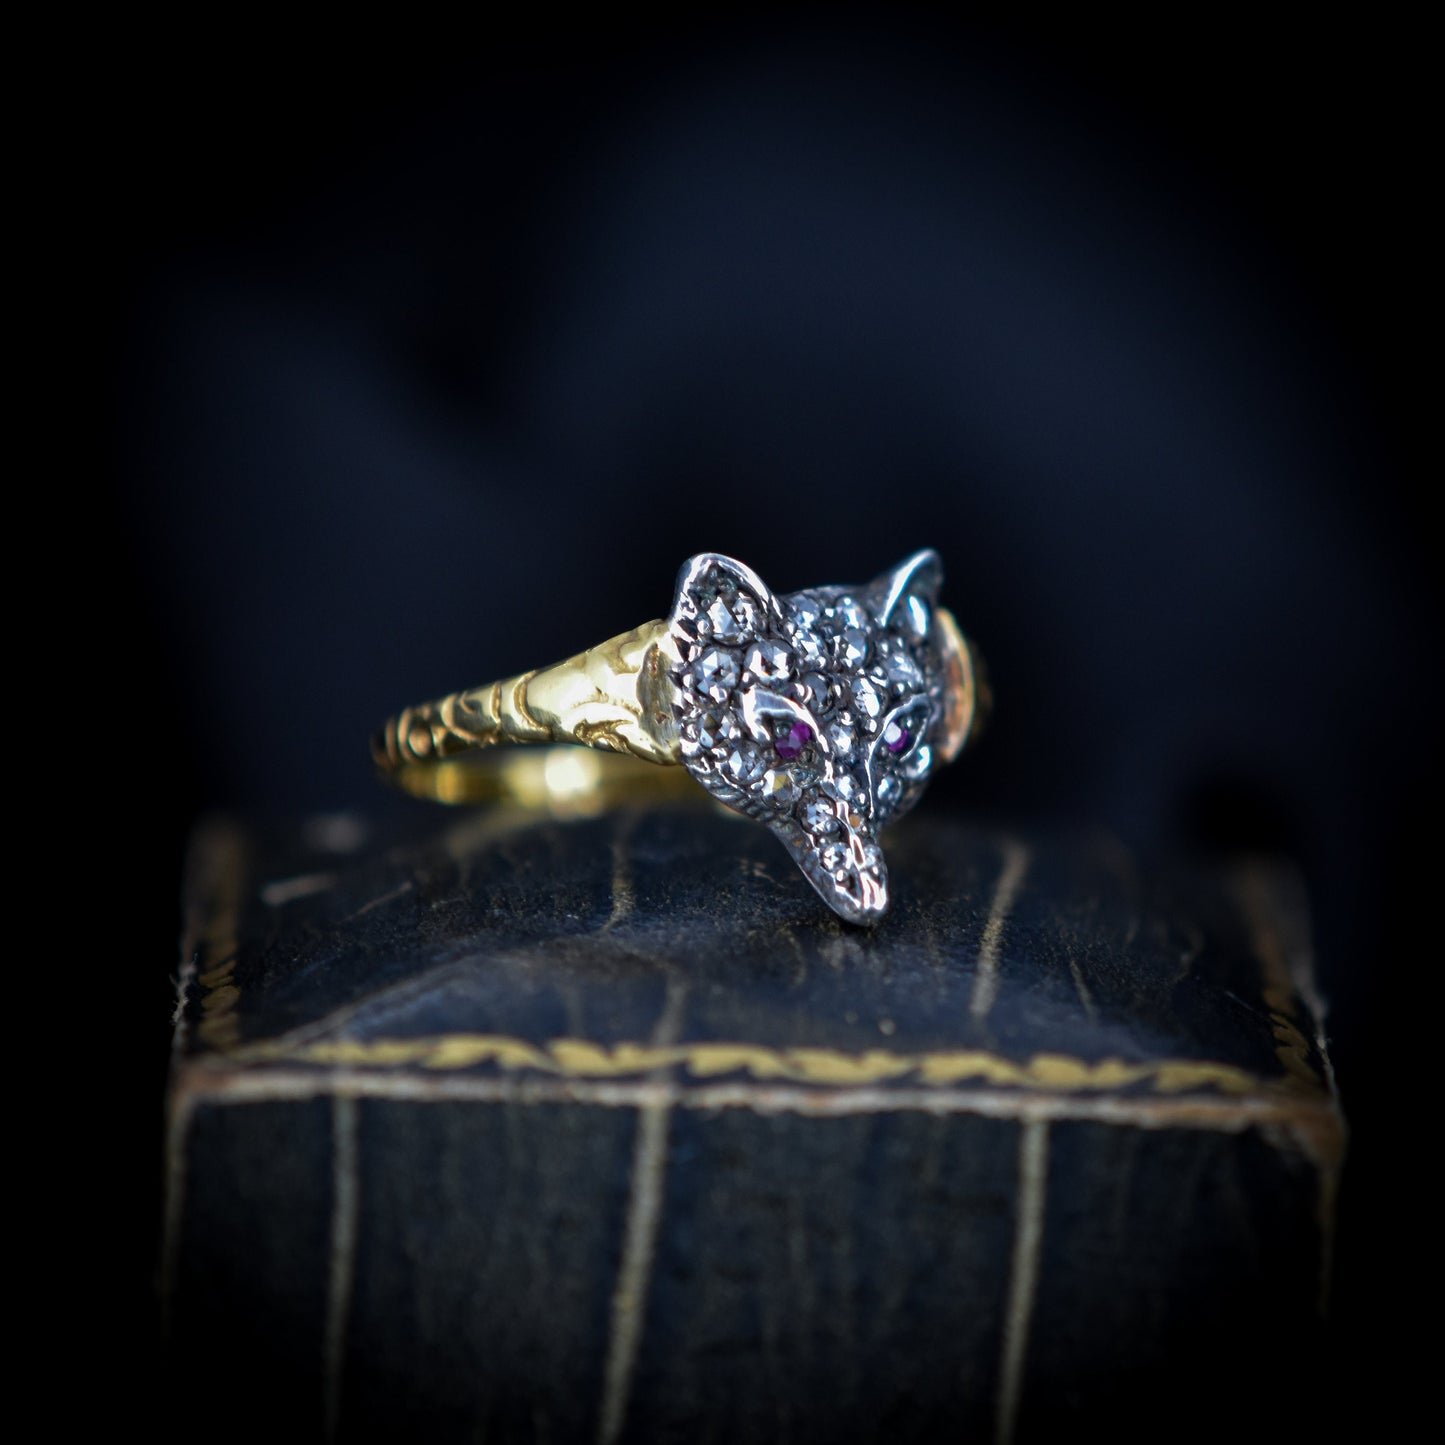 Diamond and Ruby Set Fox Head 18ct Yellow Gold and Silver Ring | Antique Victorian Style